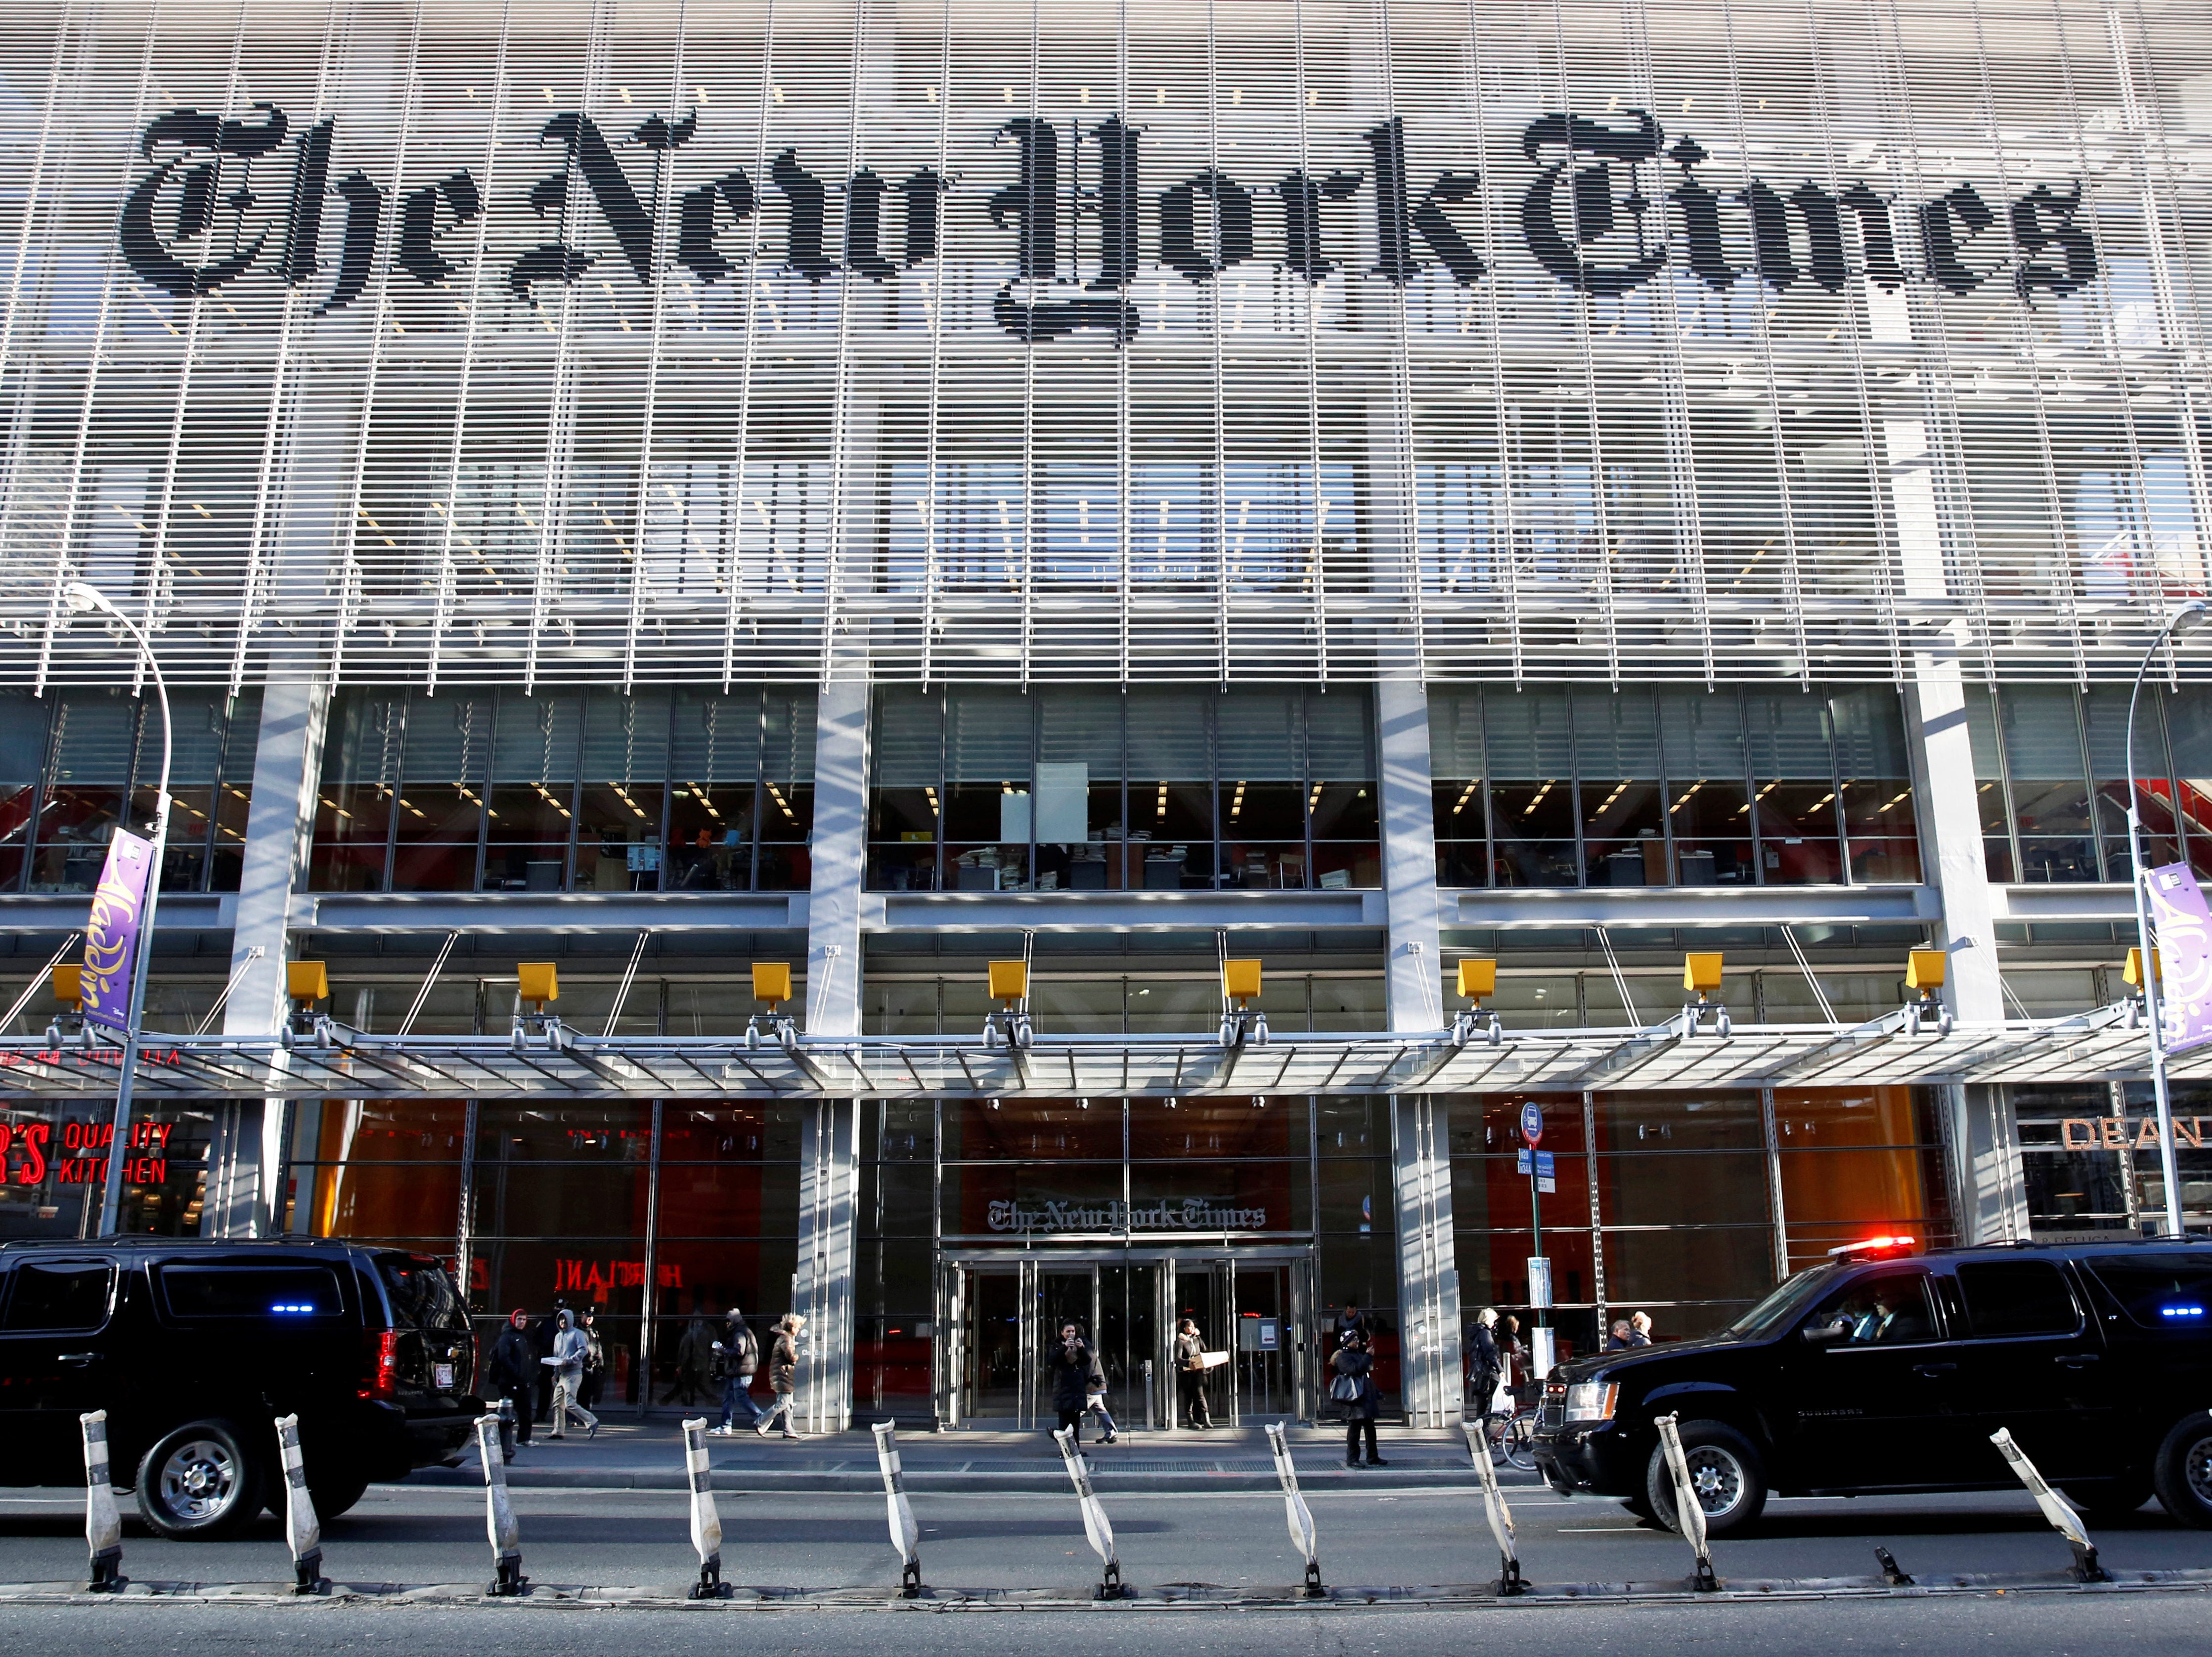 International New York Times stops daily political cartoons after running 'anti-Semitic' image